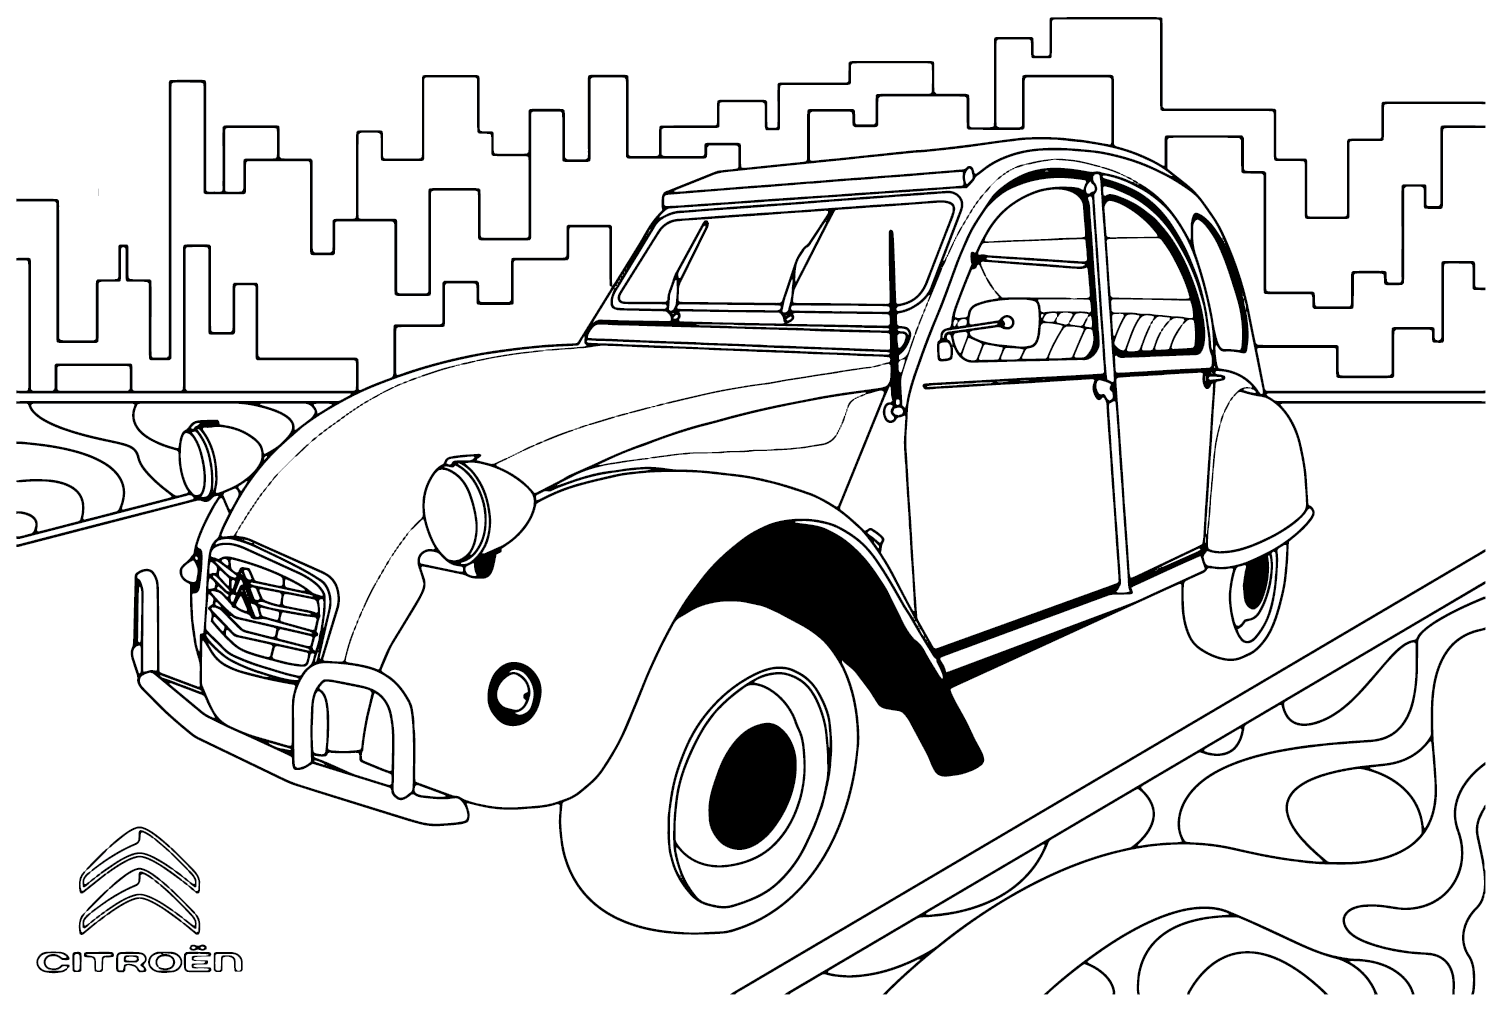 Citroën Coloring Page to Print from Citroën